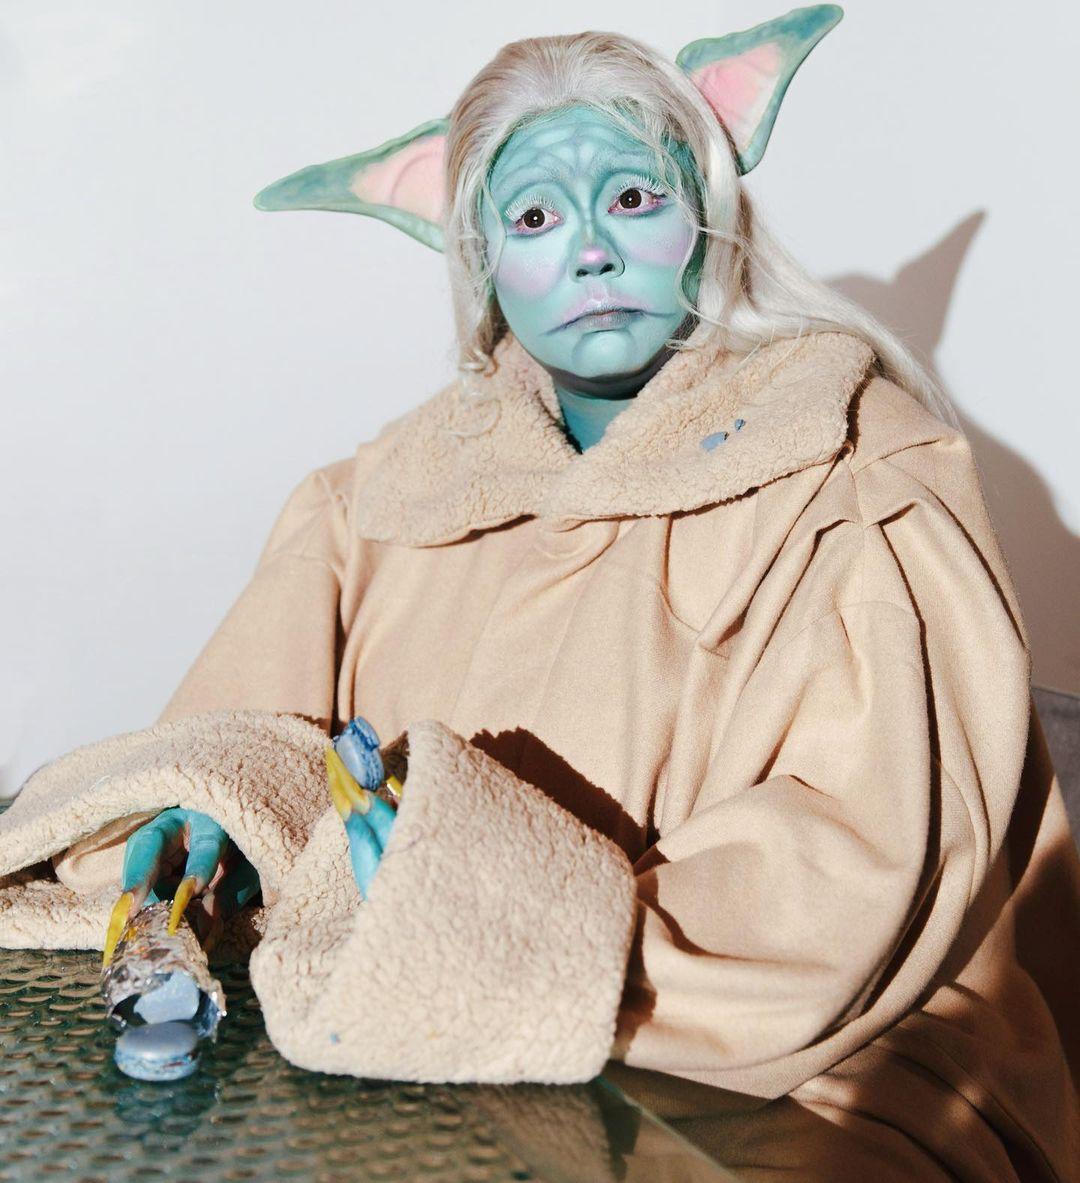 Lizzo goes as Baby Yoda for Halloween 2021